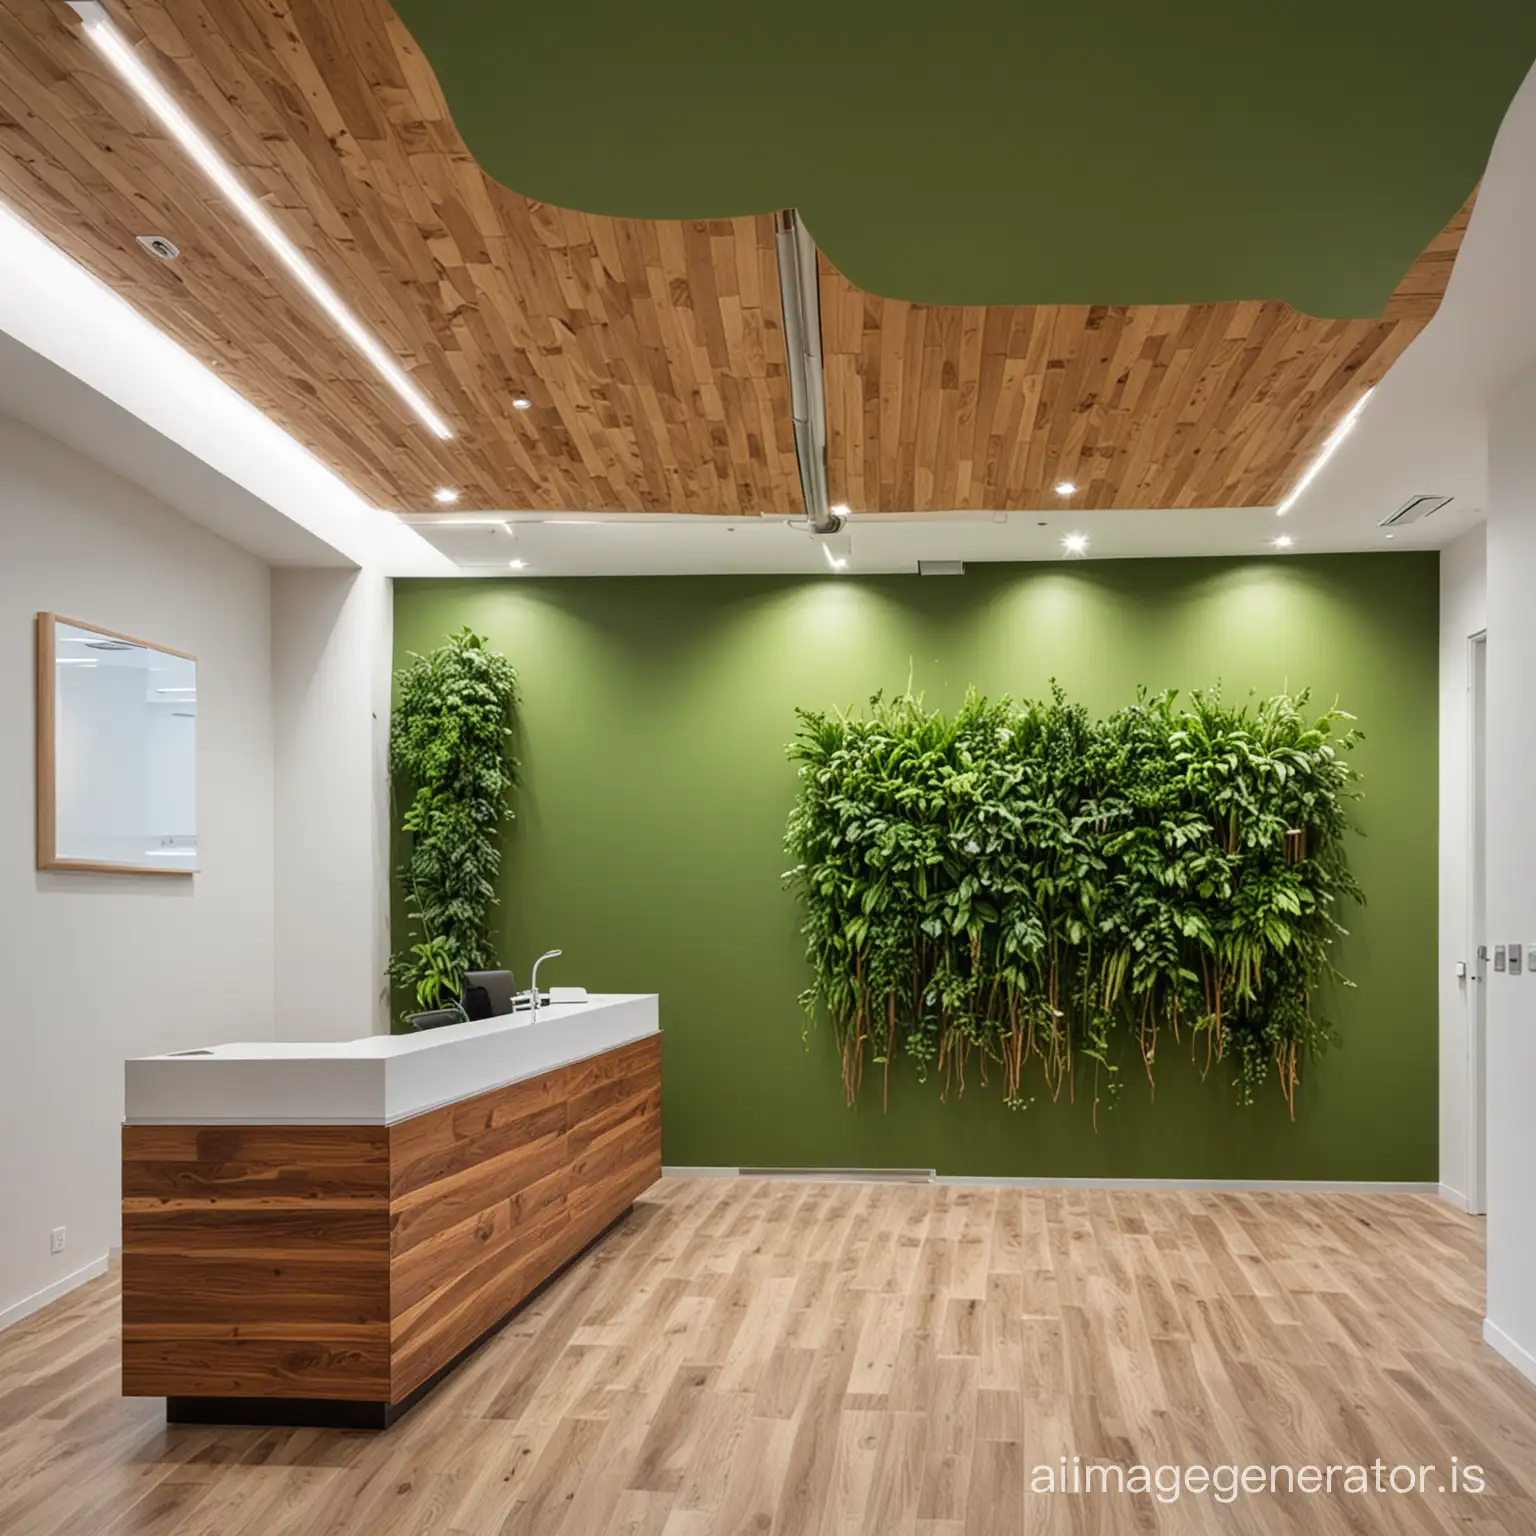 a modern light healthcare clinic interior with green wall and wood